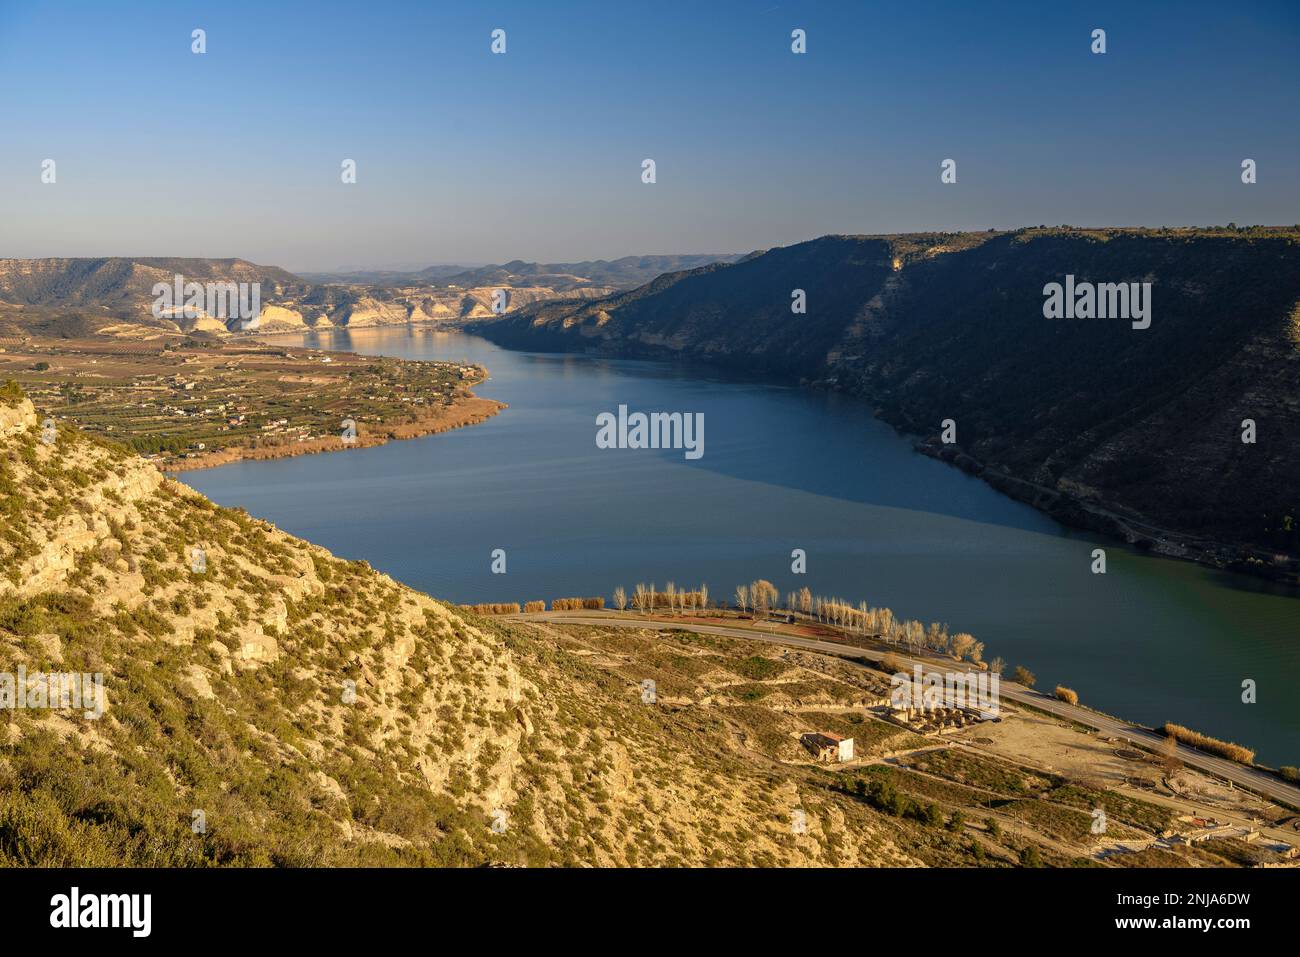 Confluence of the Segre and Ebro rivers at their junction in Mequinenza and the tail of the Riba-roja reservoir at sunset, Bajo Cinca, Zaragoza, Spain Stock Photo